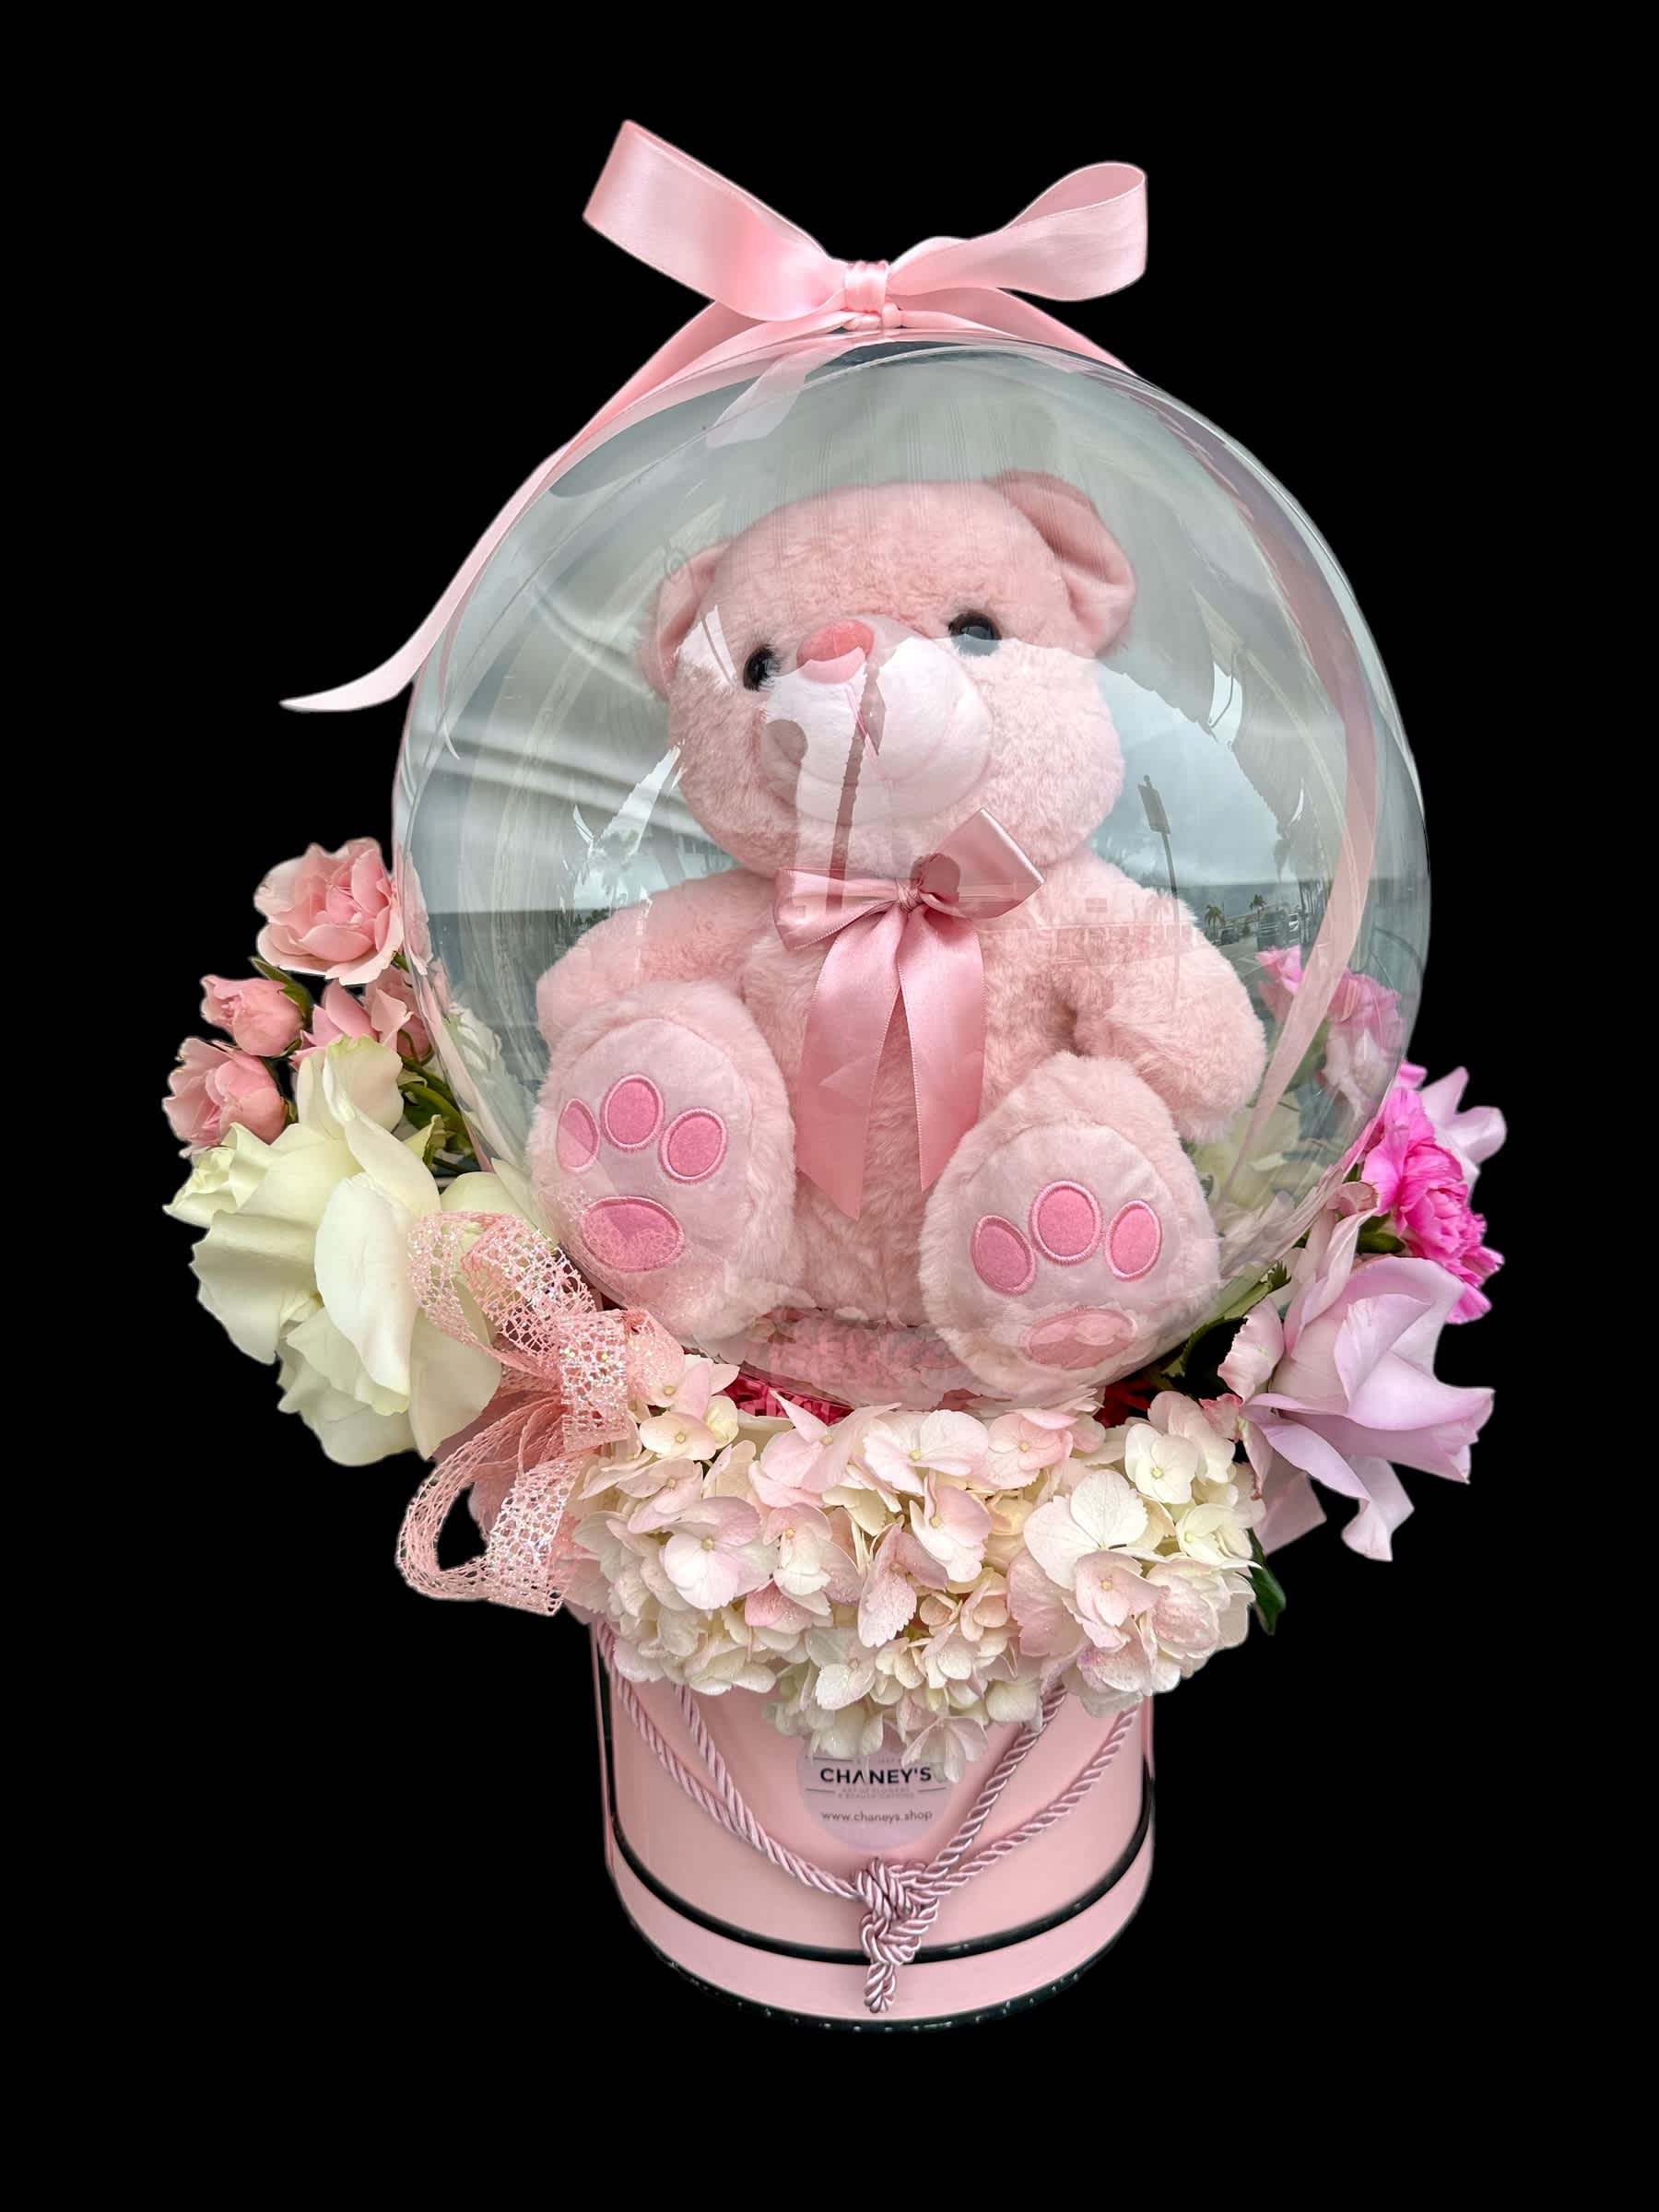 Chaney´s ITS A GIRL! Your First Teddy Box PINK - The perfect gift for a new born baby girl! A cute pink teddy bear inside a latex ballon (to take out), surrounded by beautiful fresh cut flowers. All nicely designed with love in a pink box. 